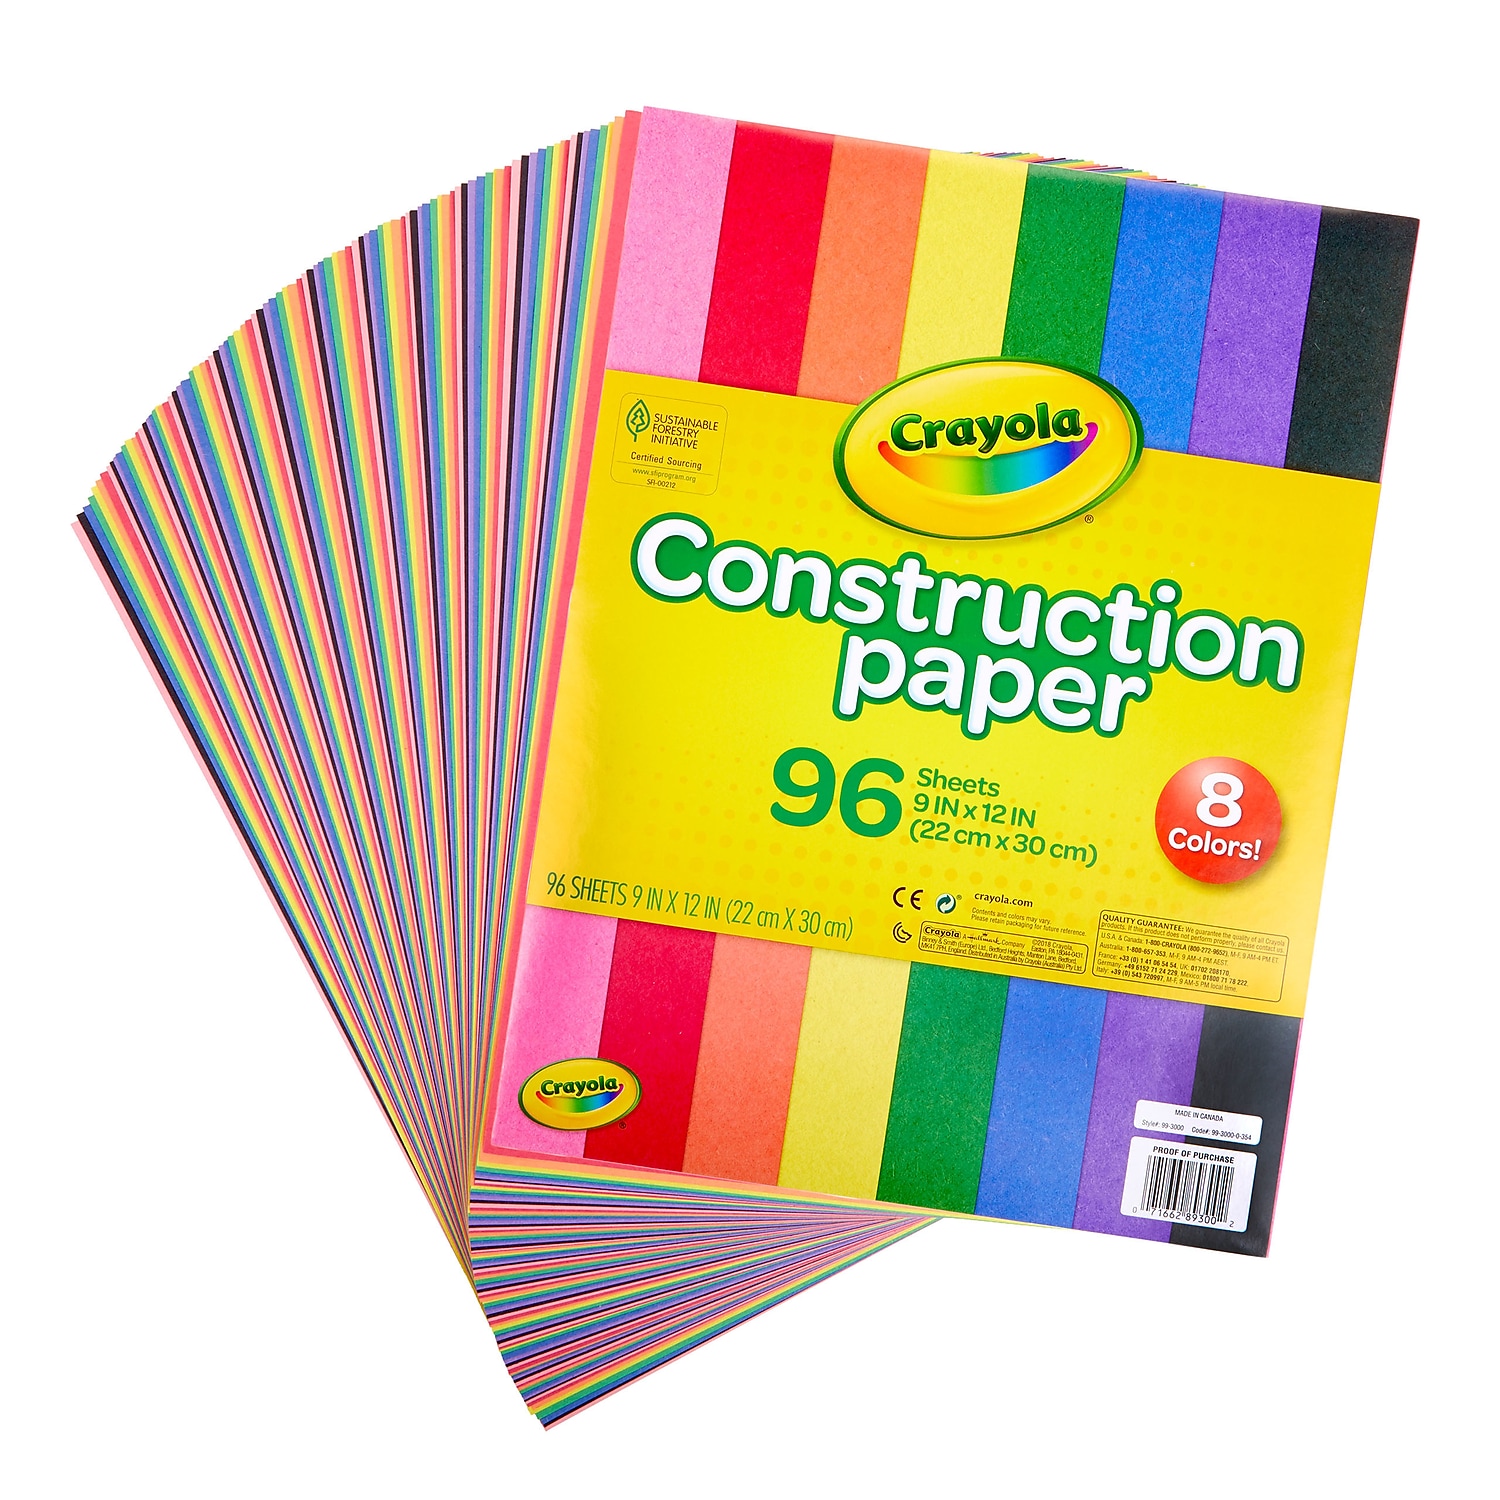 Crayola 96 Count Construction Paper Great for Crafting Projects - image 3 of 7